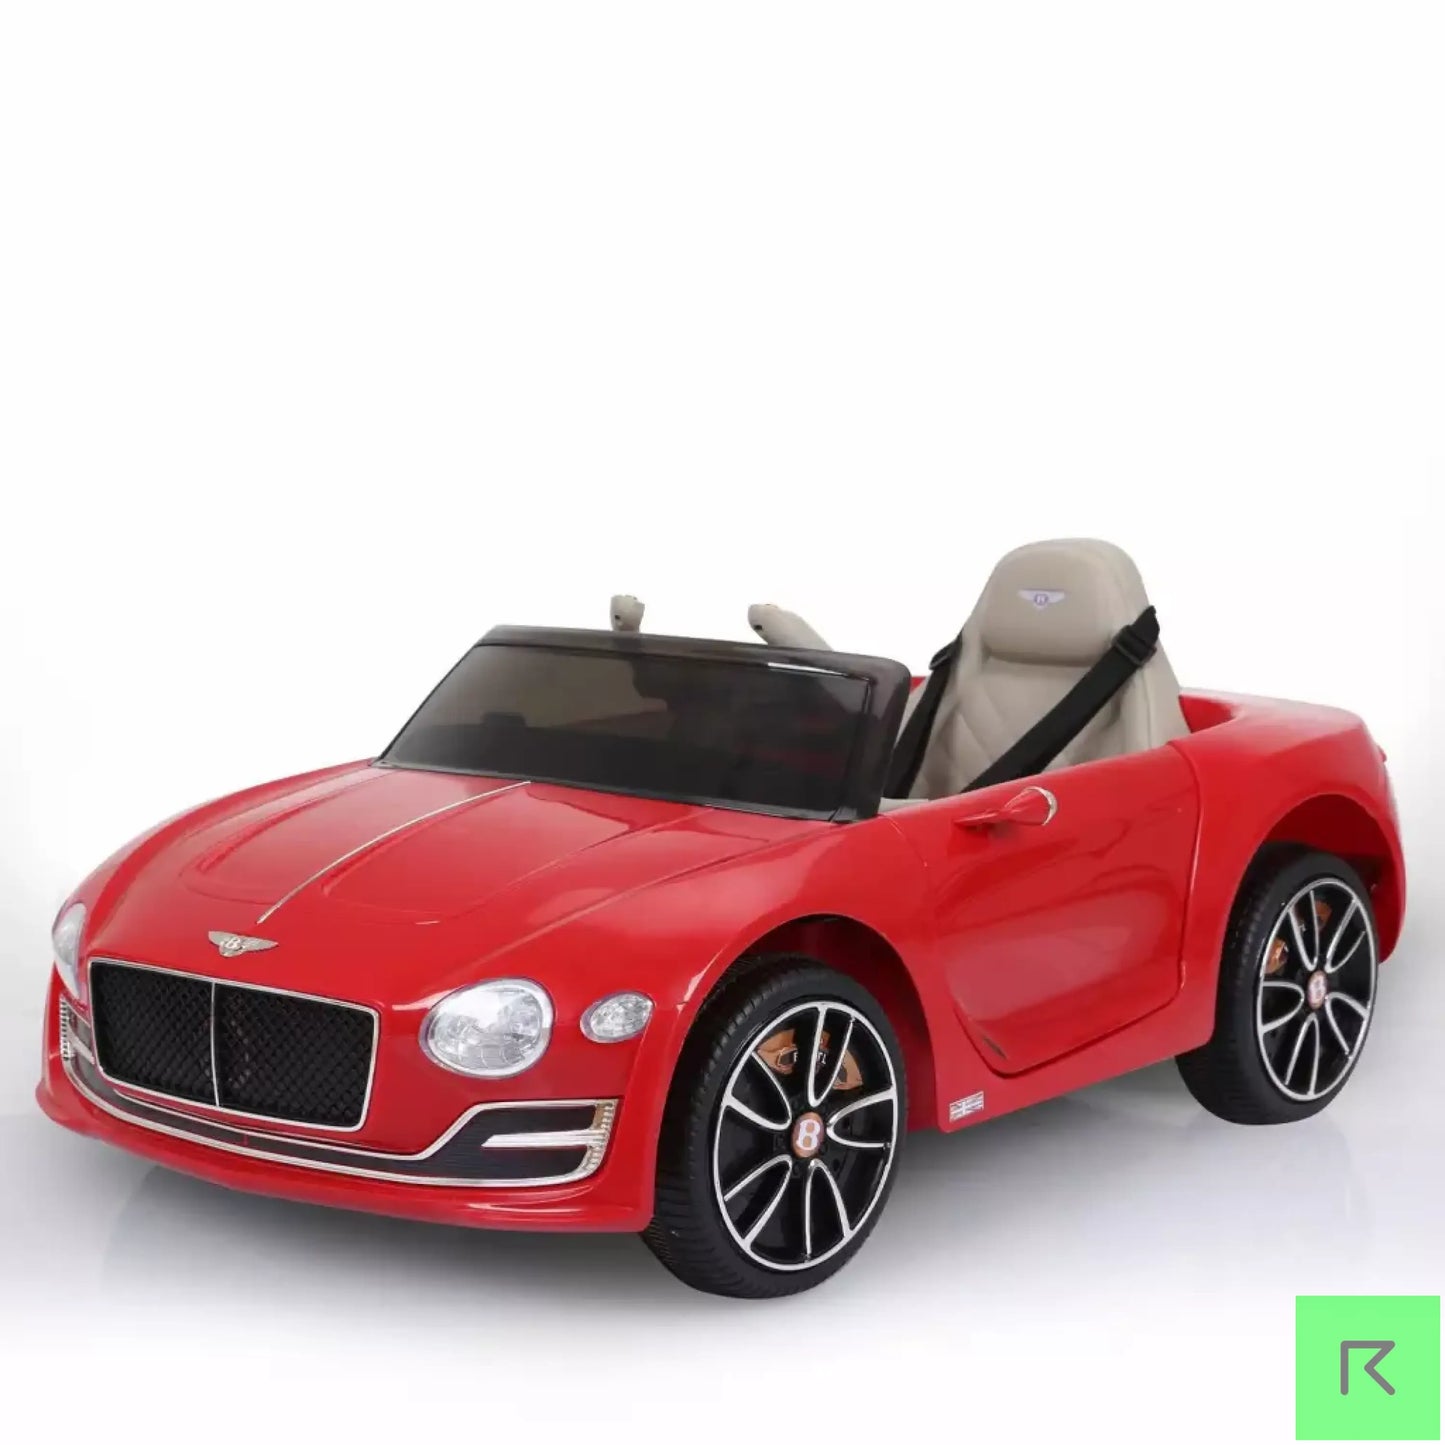 Kahuna Bentley Exp 12 Speed 6E Licensed Kids Ride On Electric Car Remote Control - Red